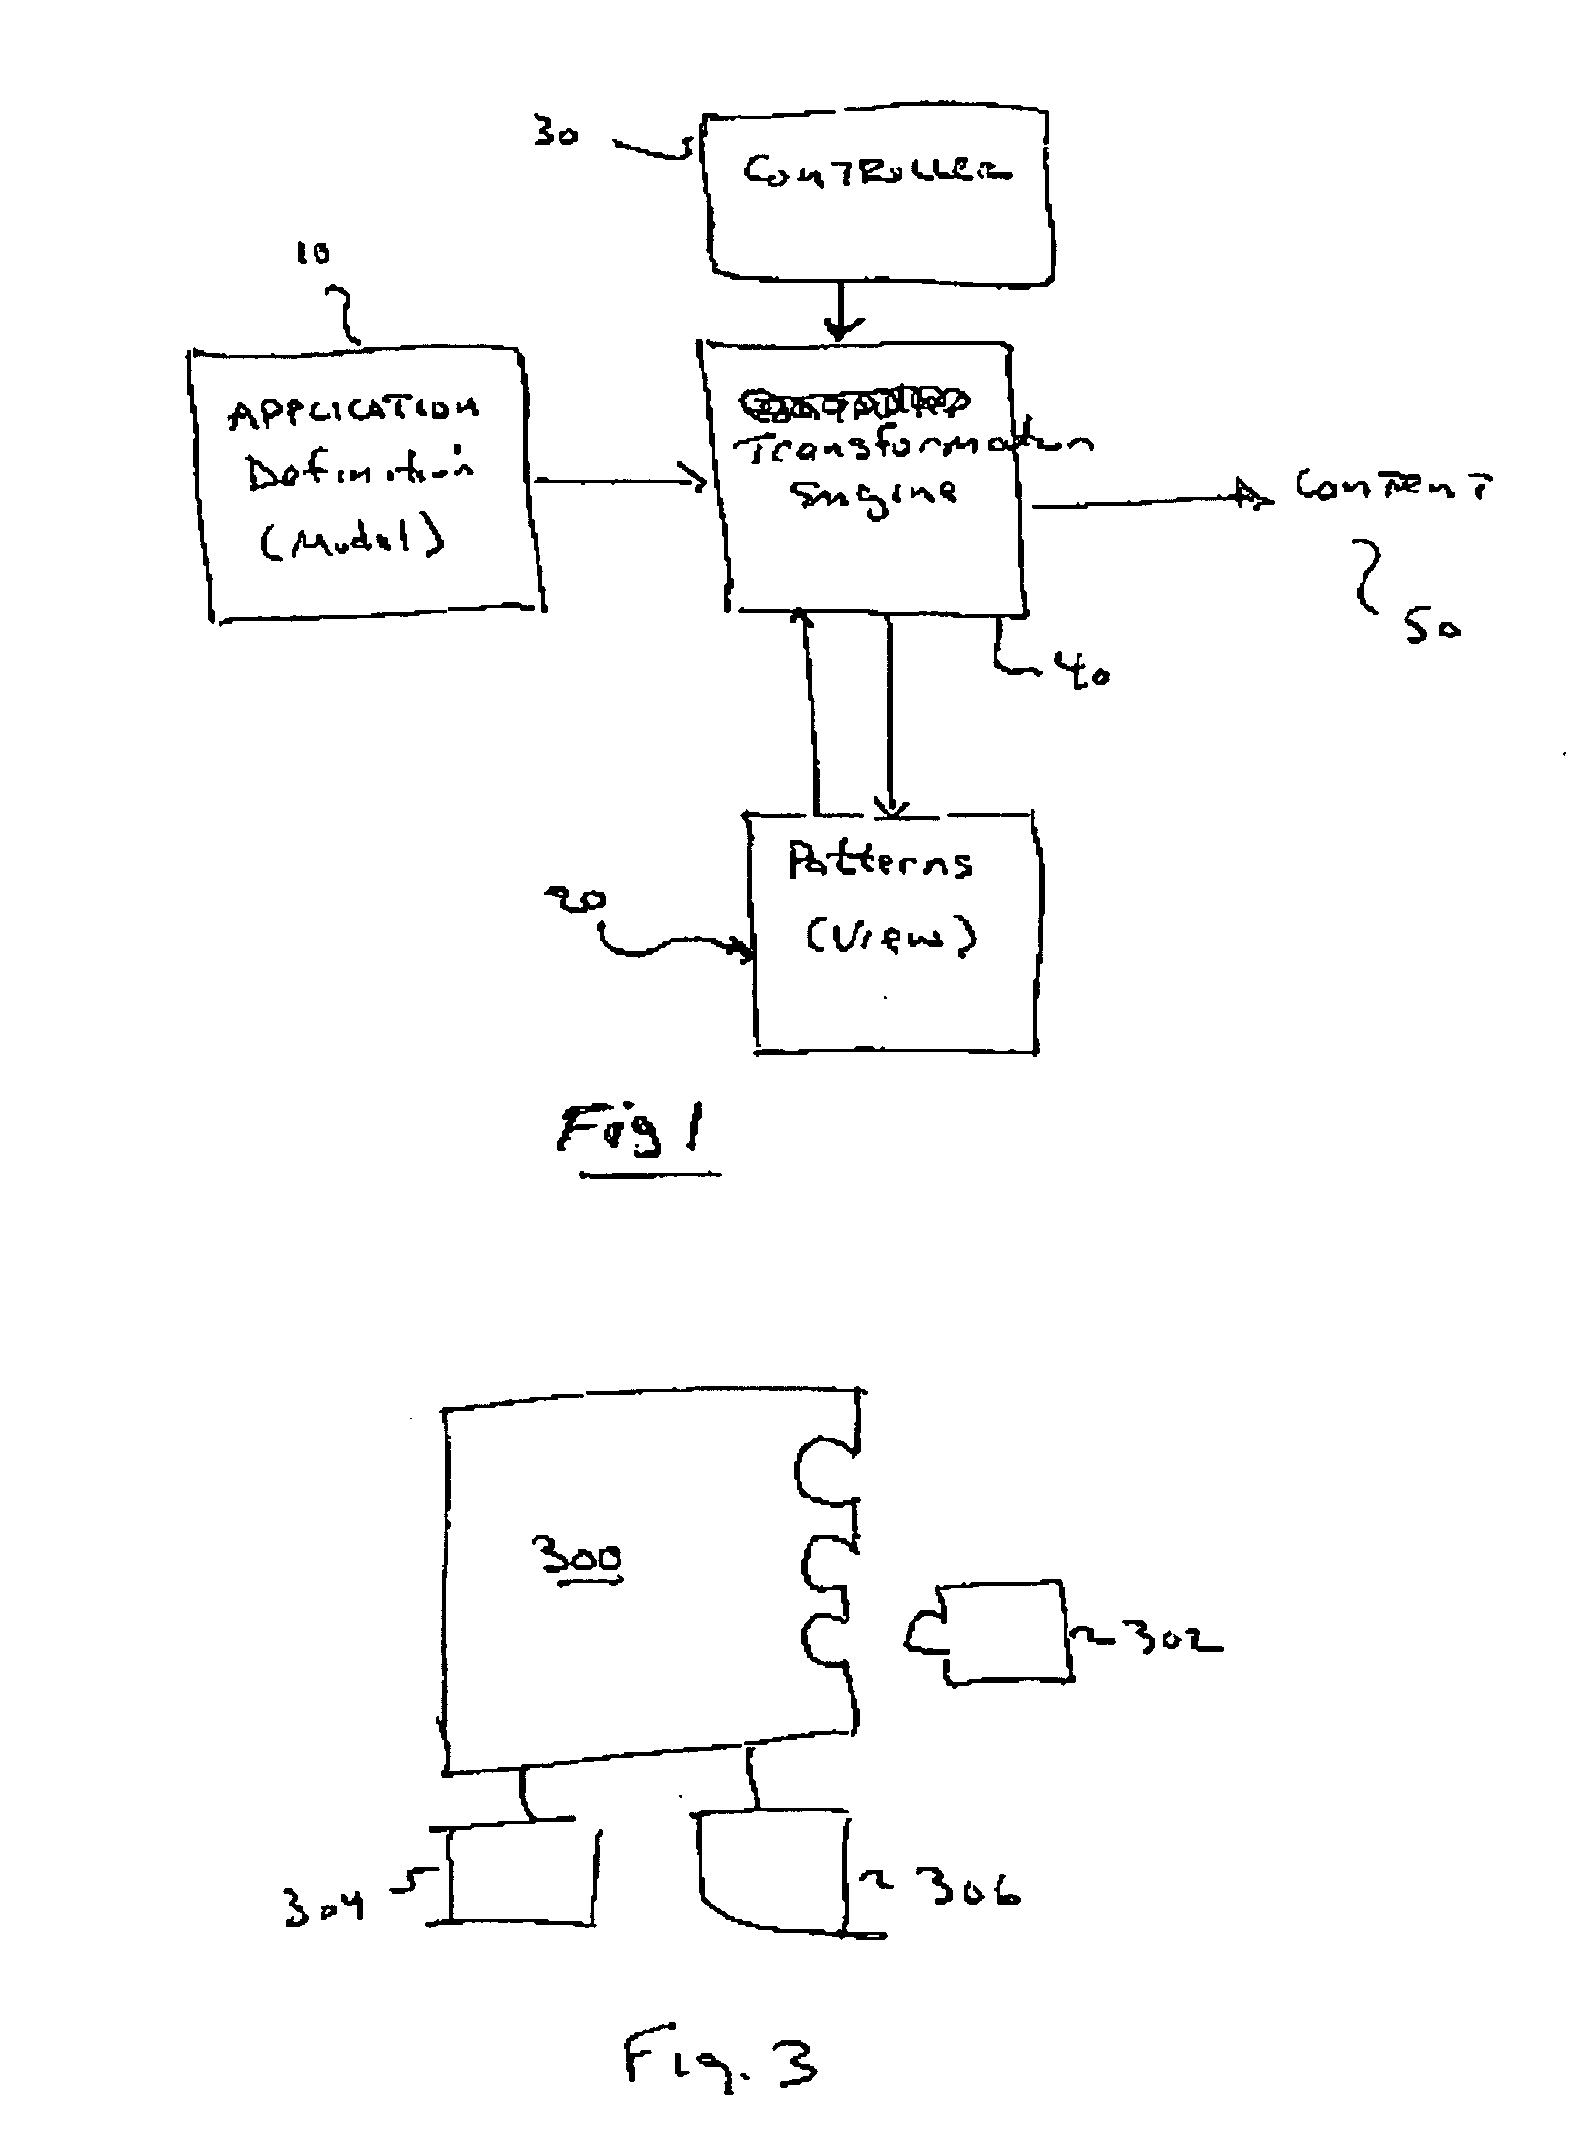 System and Method for Building an Open Model Driven Architecture Pattern Based on Exemplars